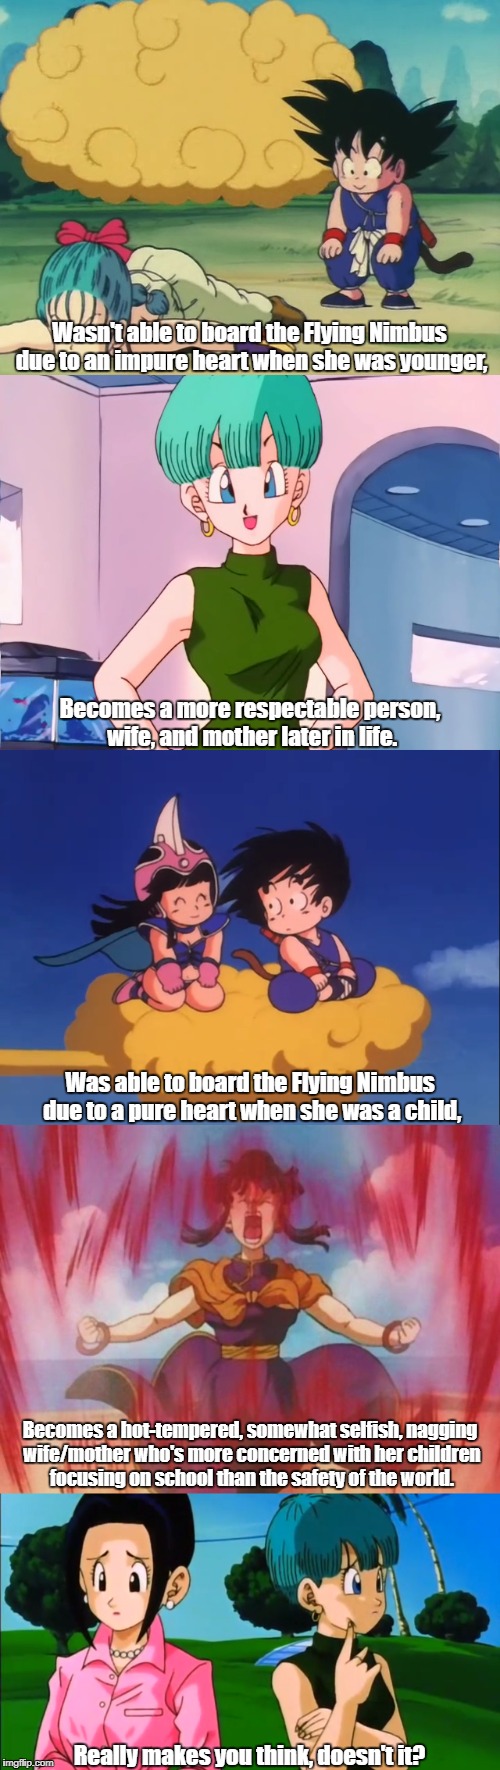 Nimbus/pure heart logic | Wasn't able to board the Flying Nimbus due to an impure heart when she was younger, Becomes a more respectable person, wife, and mother later in life. Was able to board the Flying Nimbus due to a pure heart when she was a child, Becomes a hot-tempered, somewhat selfish, nagging wife/mother who's more concerned with her children focusing on school than the safety of the world. Really makes you think, doesn't it? | image tagged in dbz | made w/ Imgflip meme maker